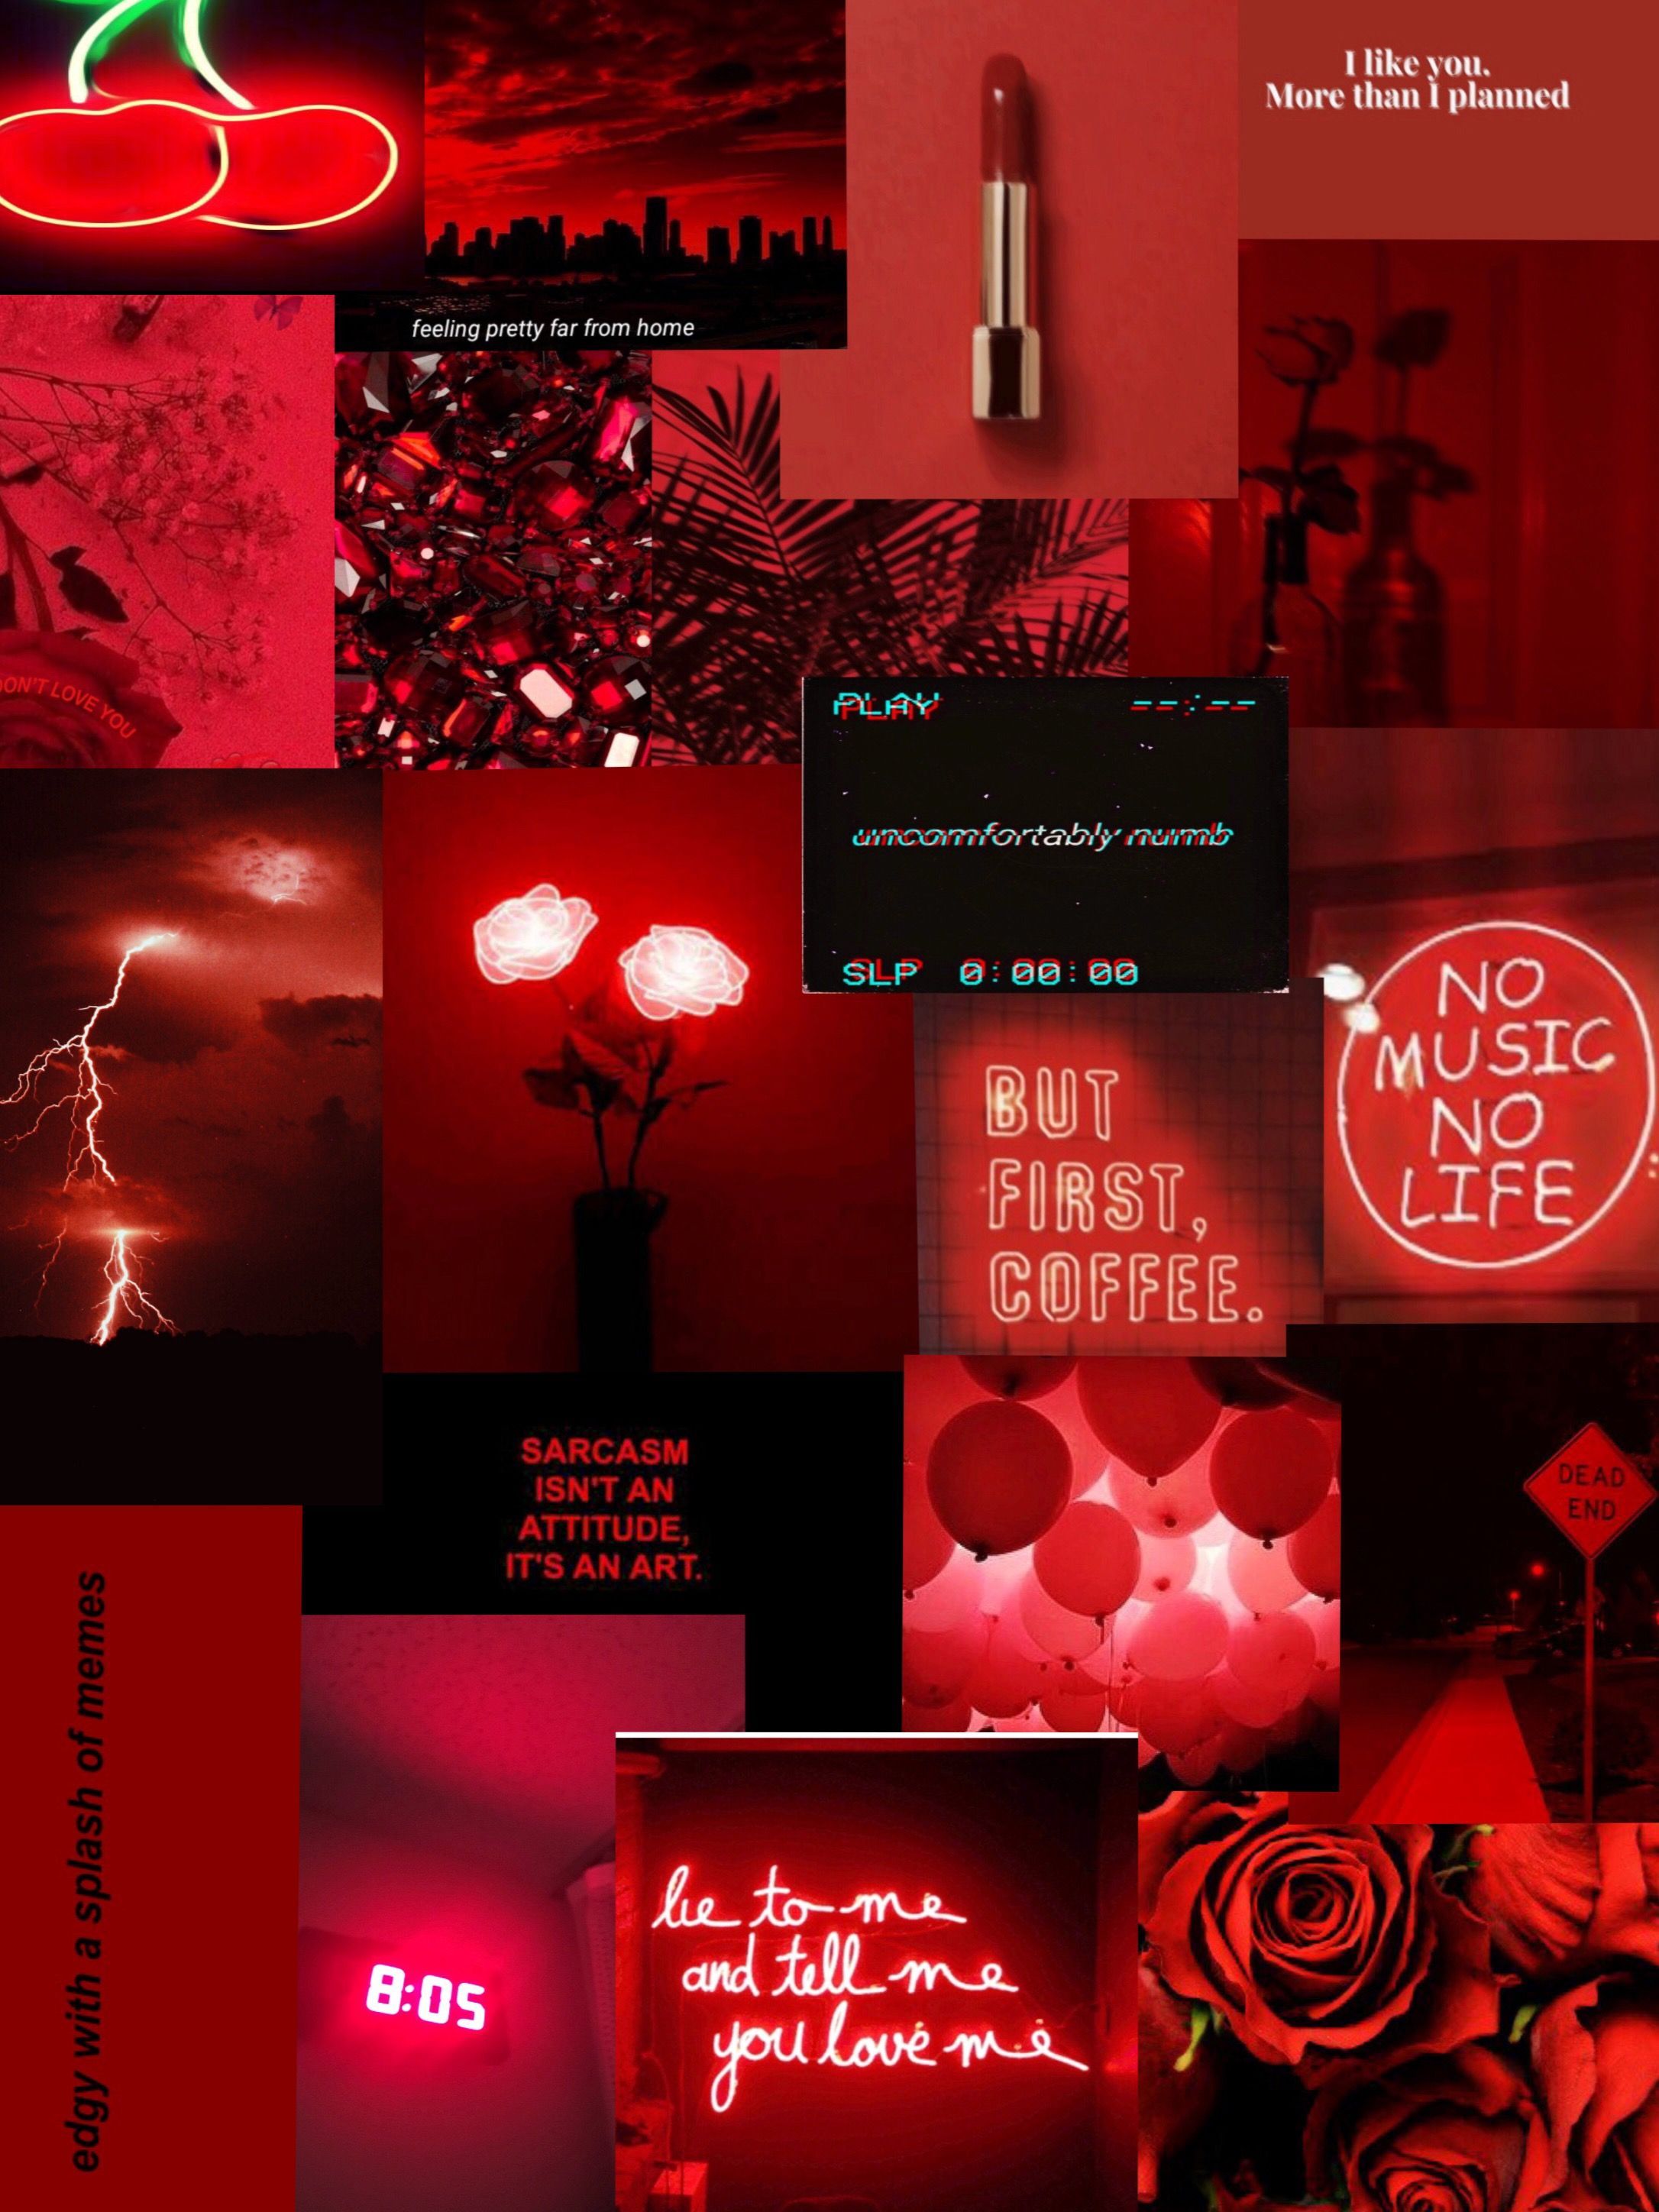 Free download Red Aesthetic Laptop Wallpapers Top Red ...